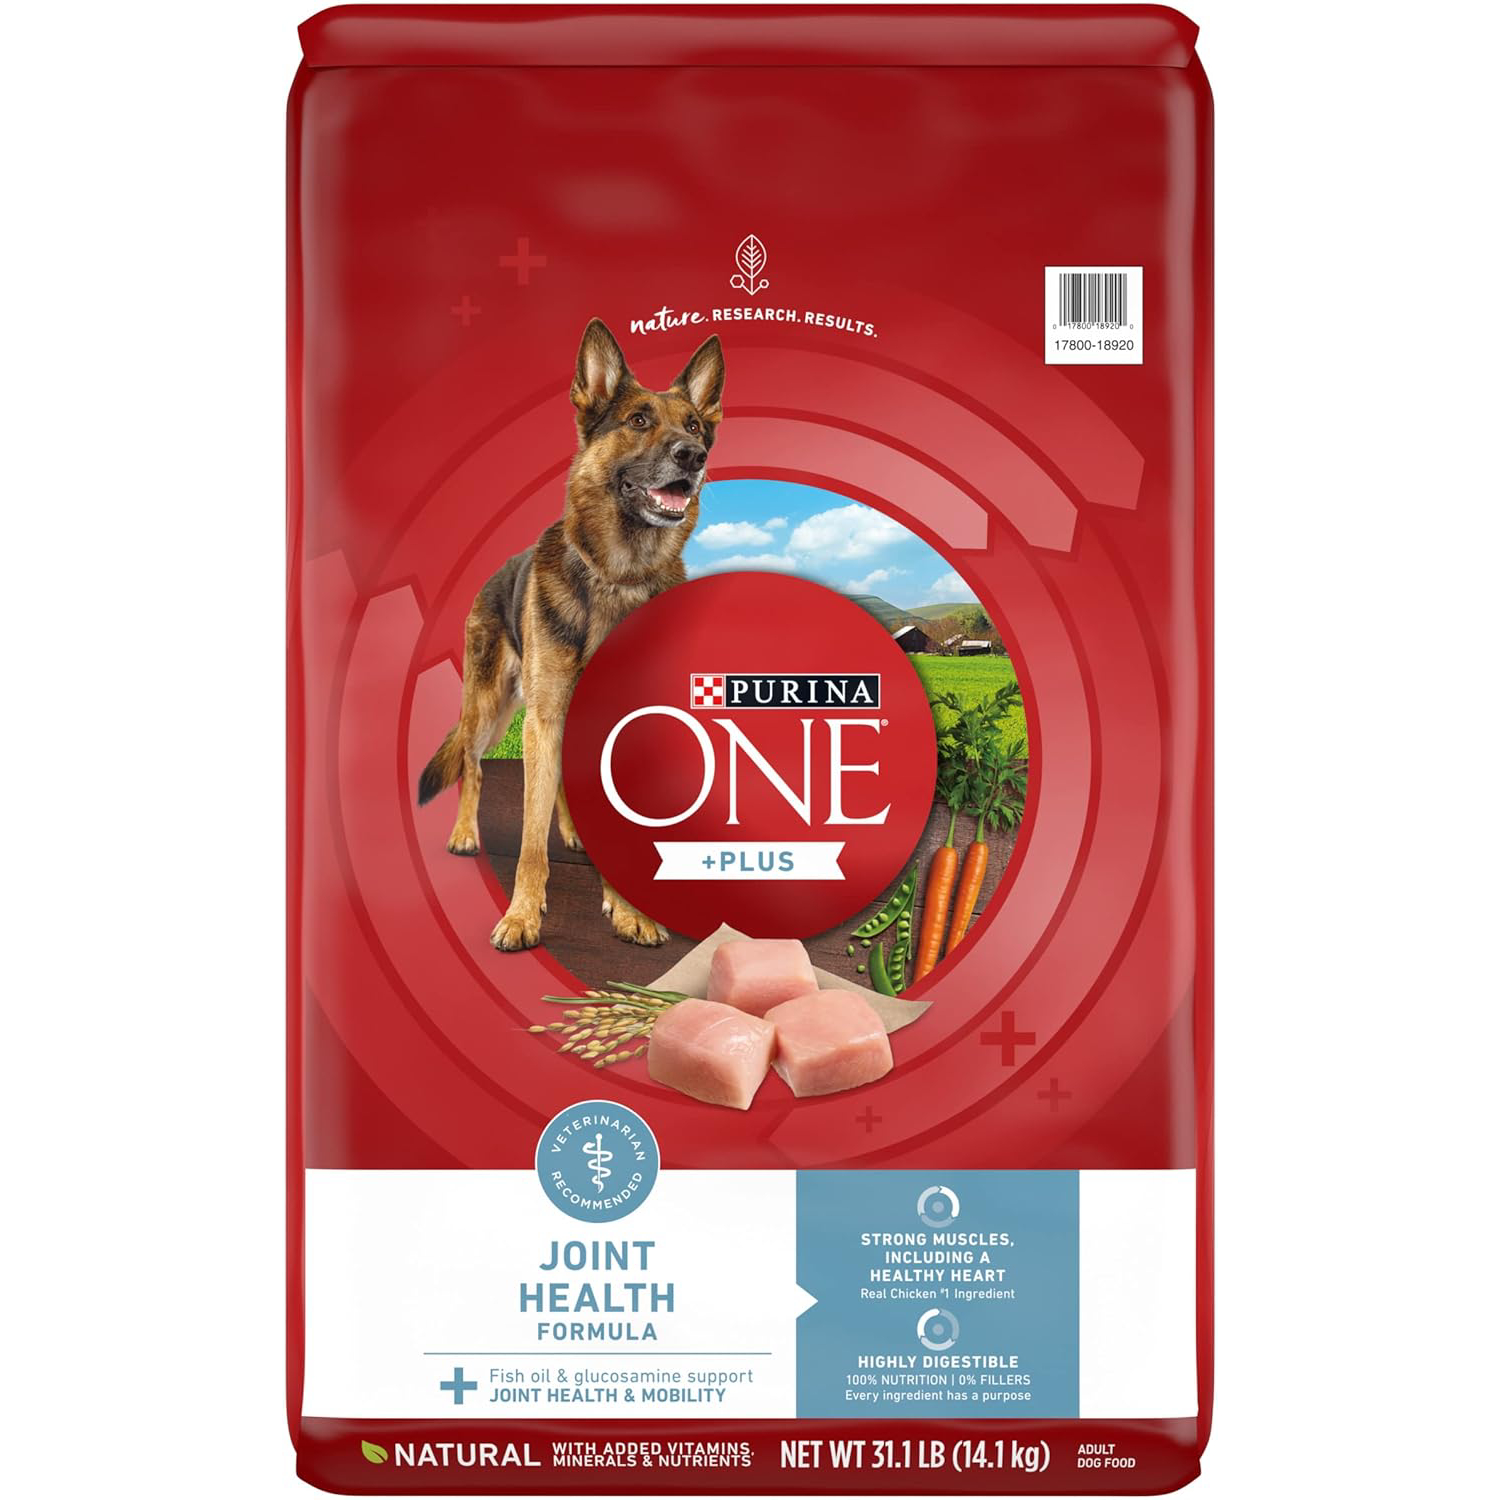 Purina ONE Plus Joint Health Formula Natural With Added Vitamins, Minerals and Nutrients Dry Dog Food